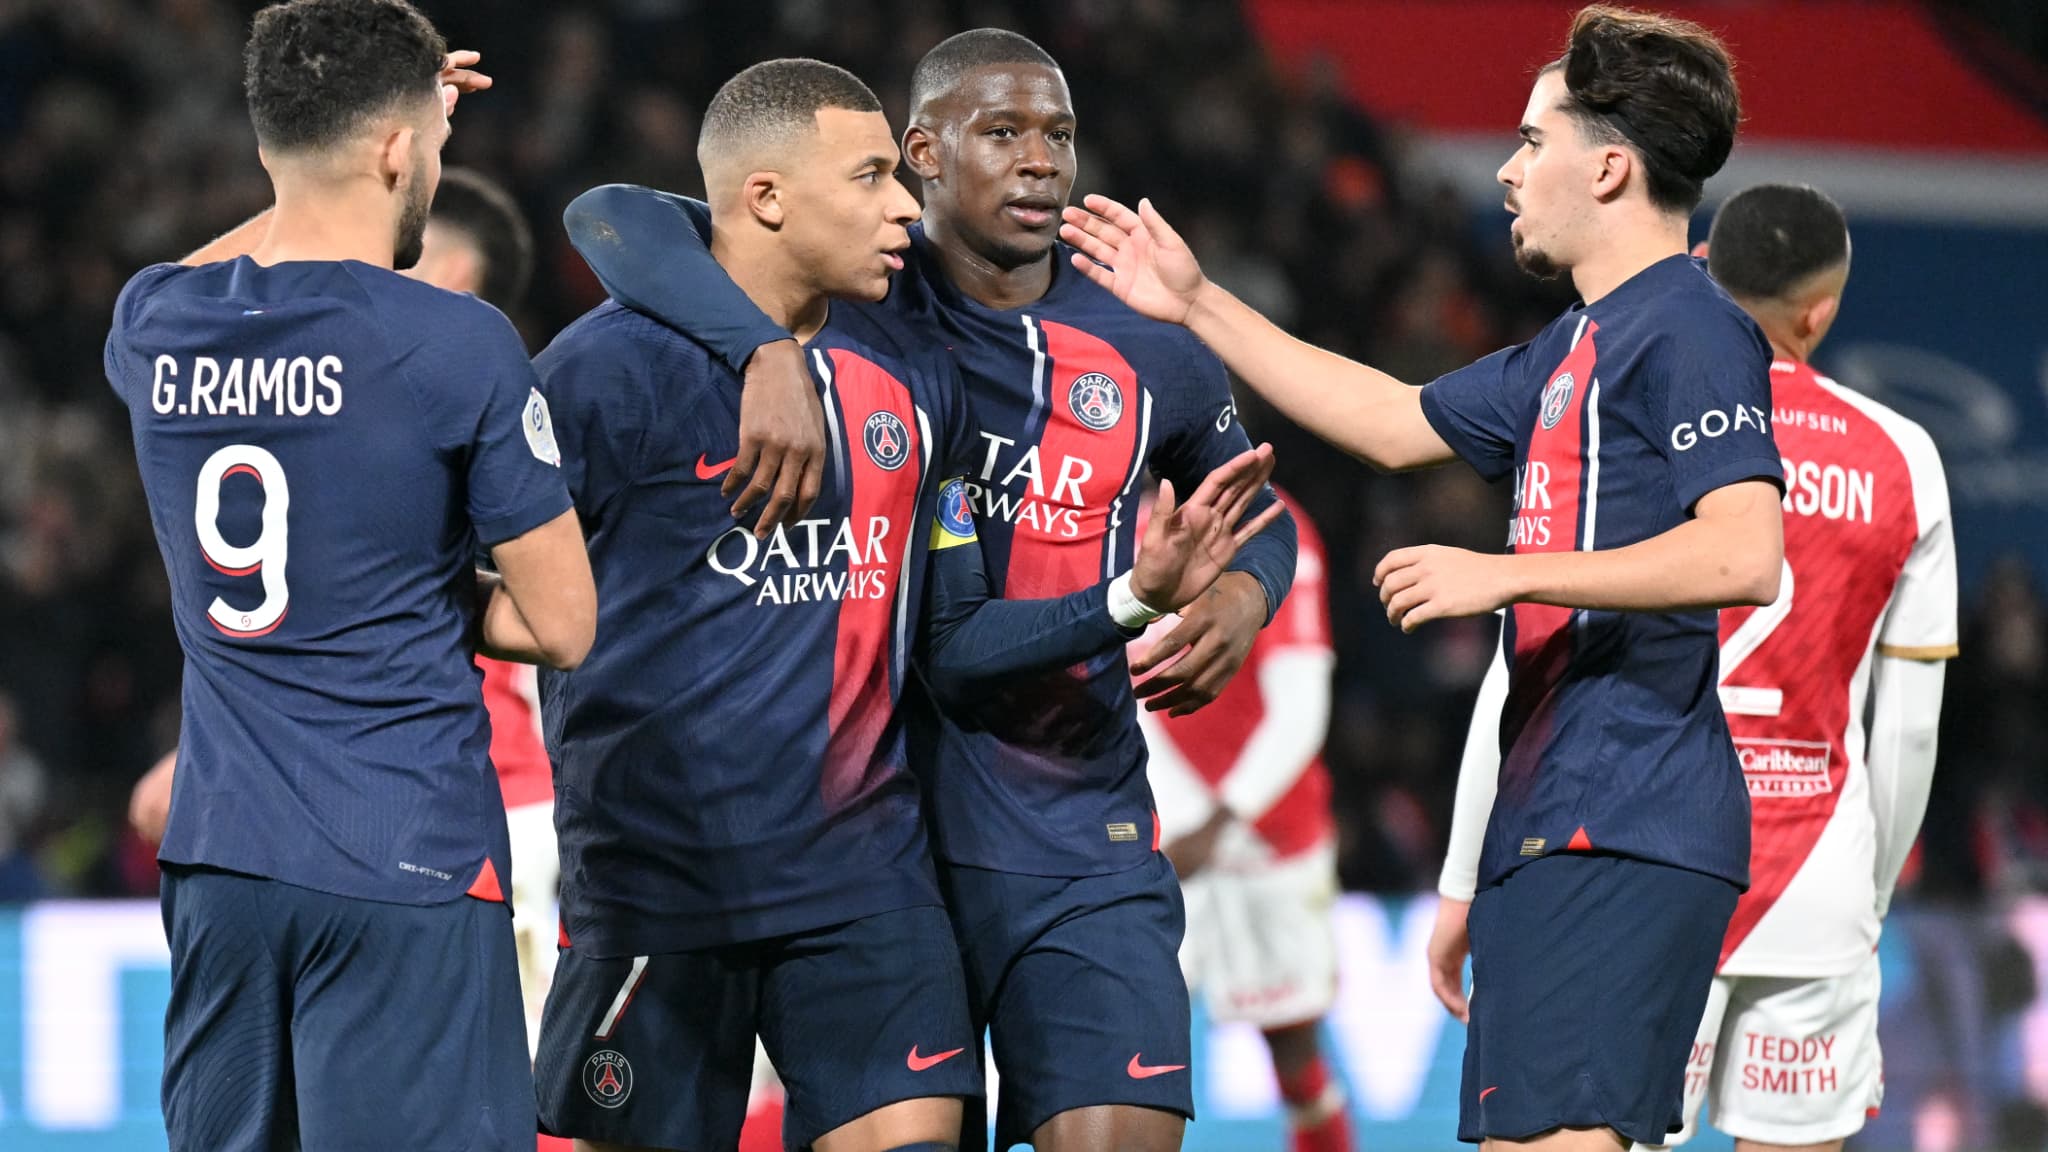 Paris Saint-Germain, Napoli, Manchester United… These are the 10 teams that will compete for the last 4 tickets to the knockout stages of the Champions League.